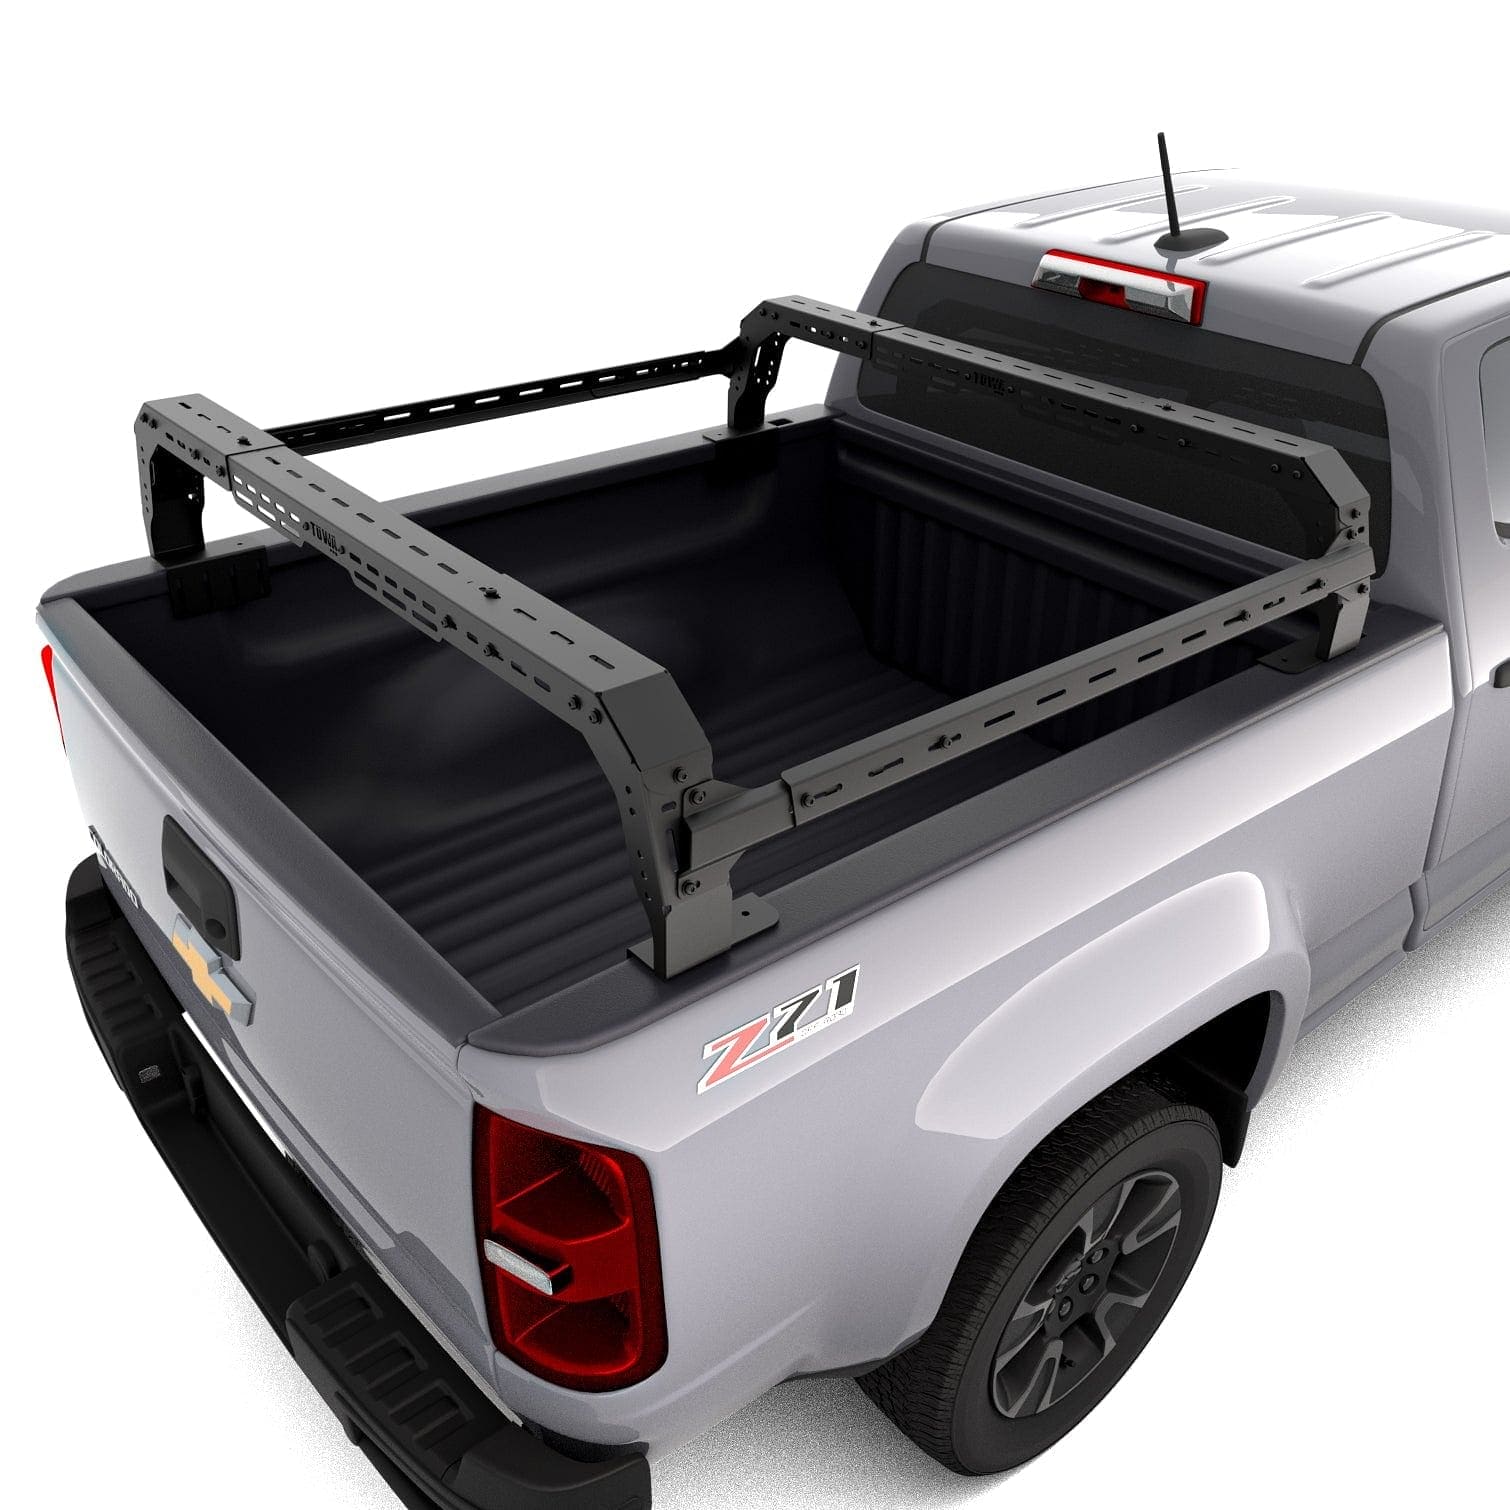 Chevy Colorado SHIPROCK Mid Rack System MIDRACK TUWA PRO®️ top corner view installed on white background